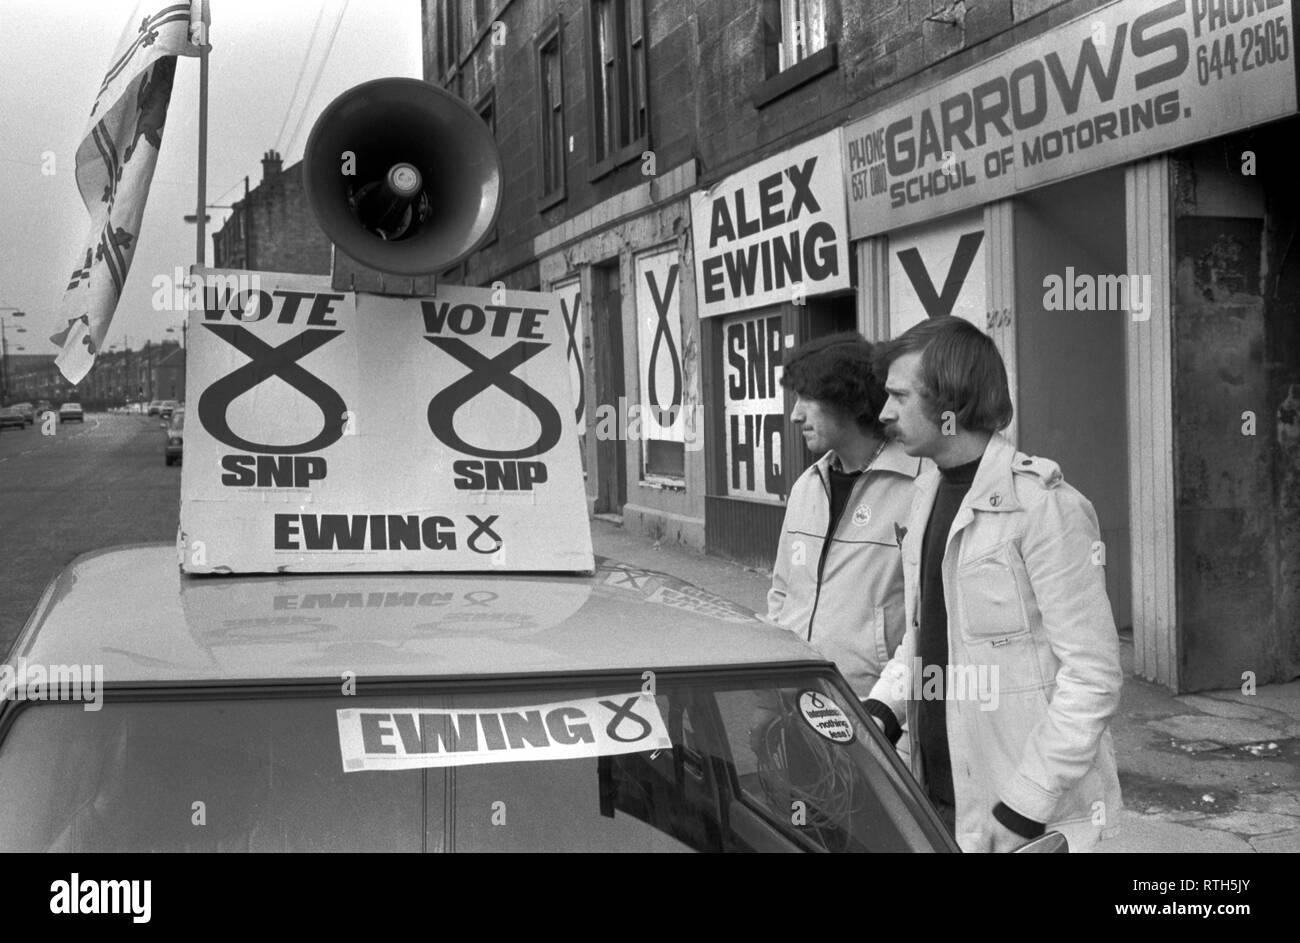 SNP Scottish National Party logo. Prospective MP Alex Ewing campaigning in 1979 Cathcart, Glasgow.  1970s. He did not win and came third to labour and then Conservative. HOMER SYKES Stock Photo